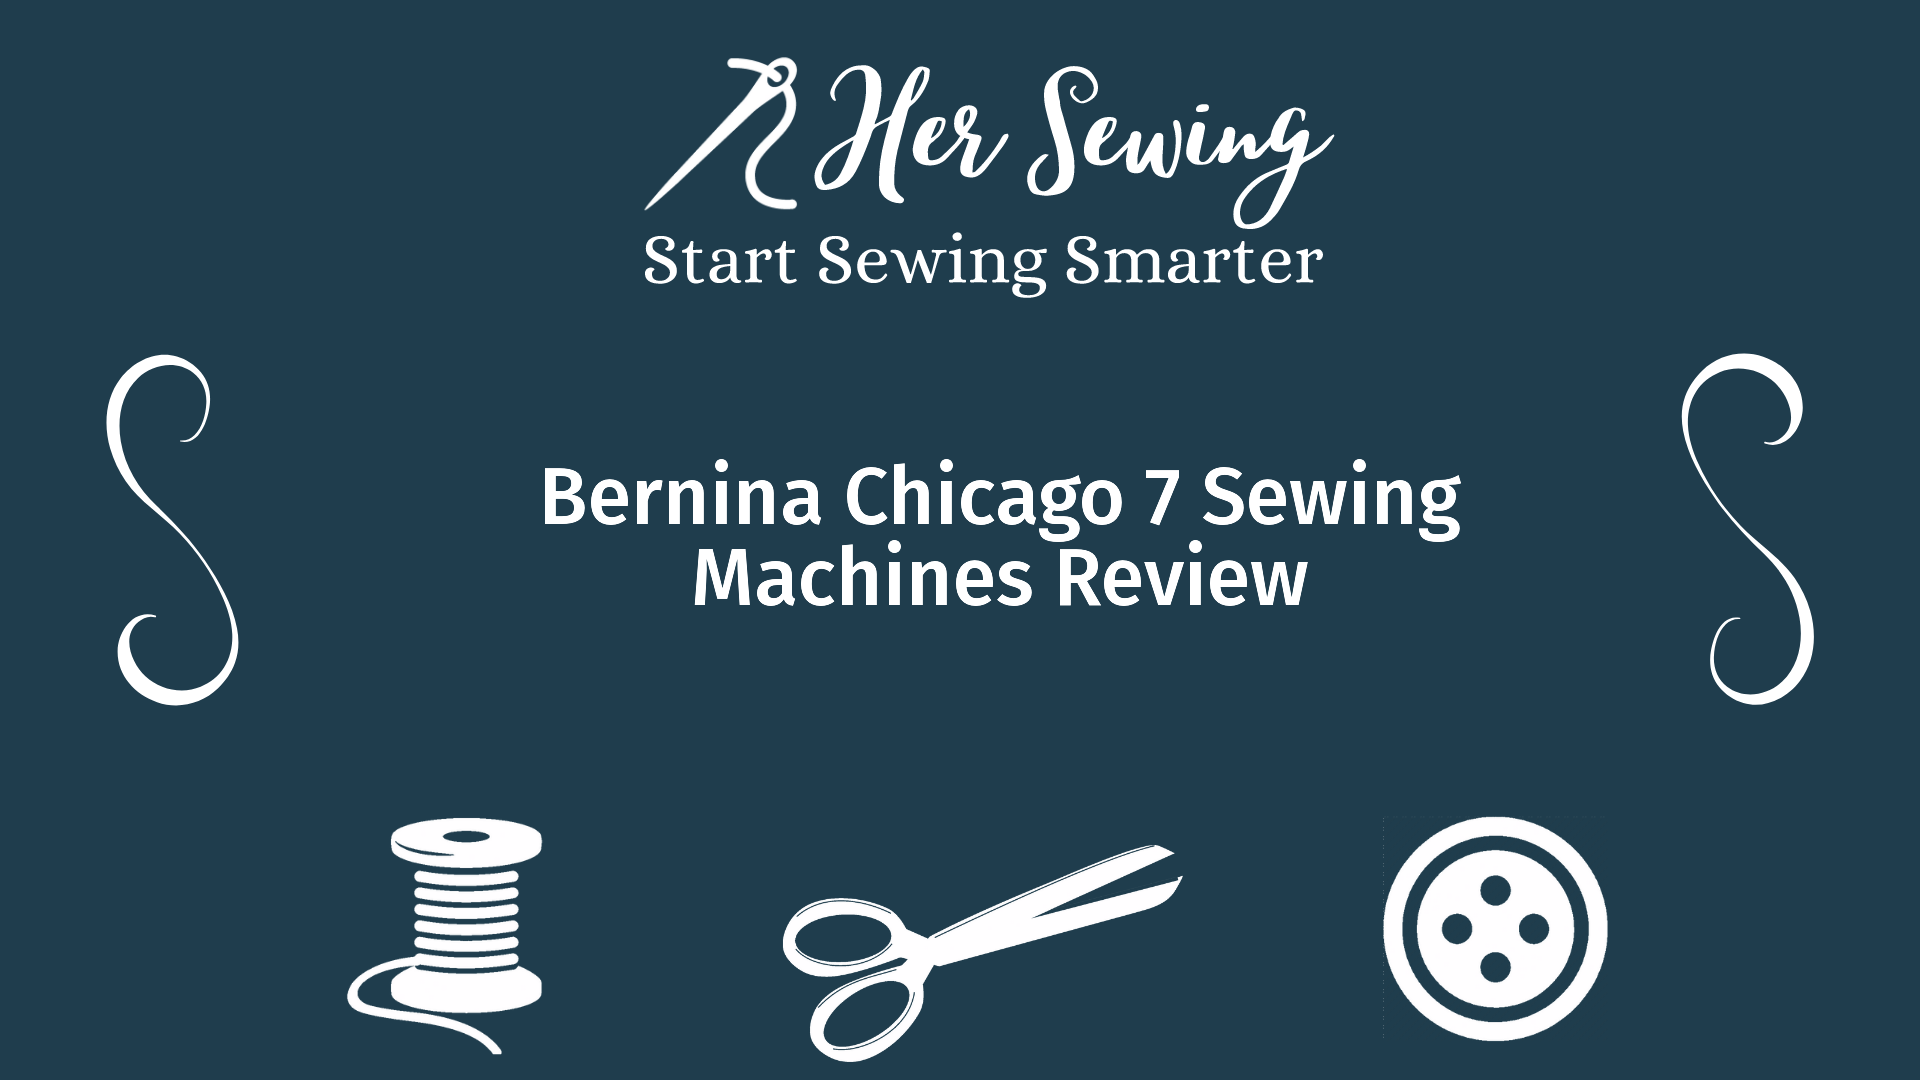 Bernina Chicago 7 Sewing Machines Review